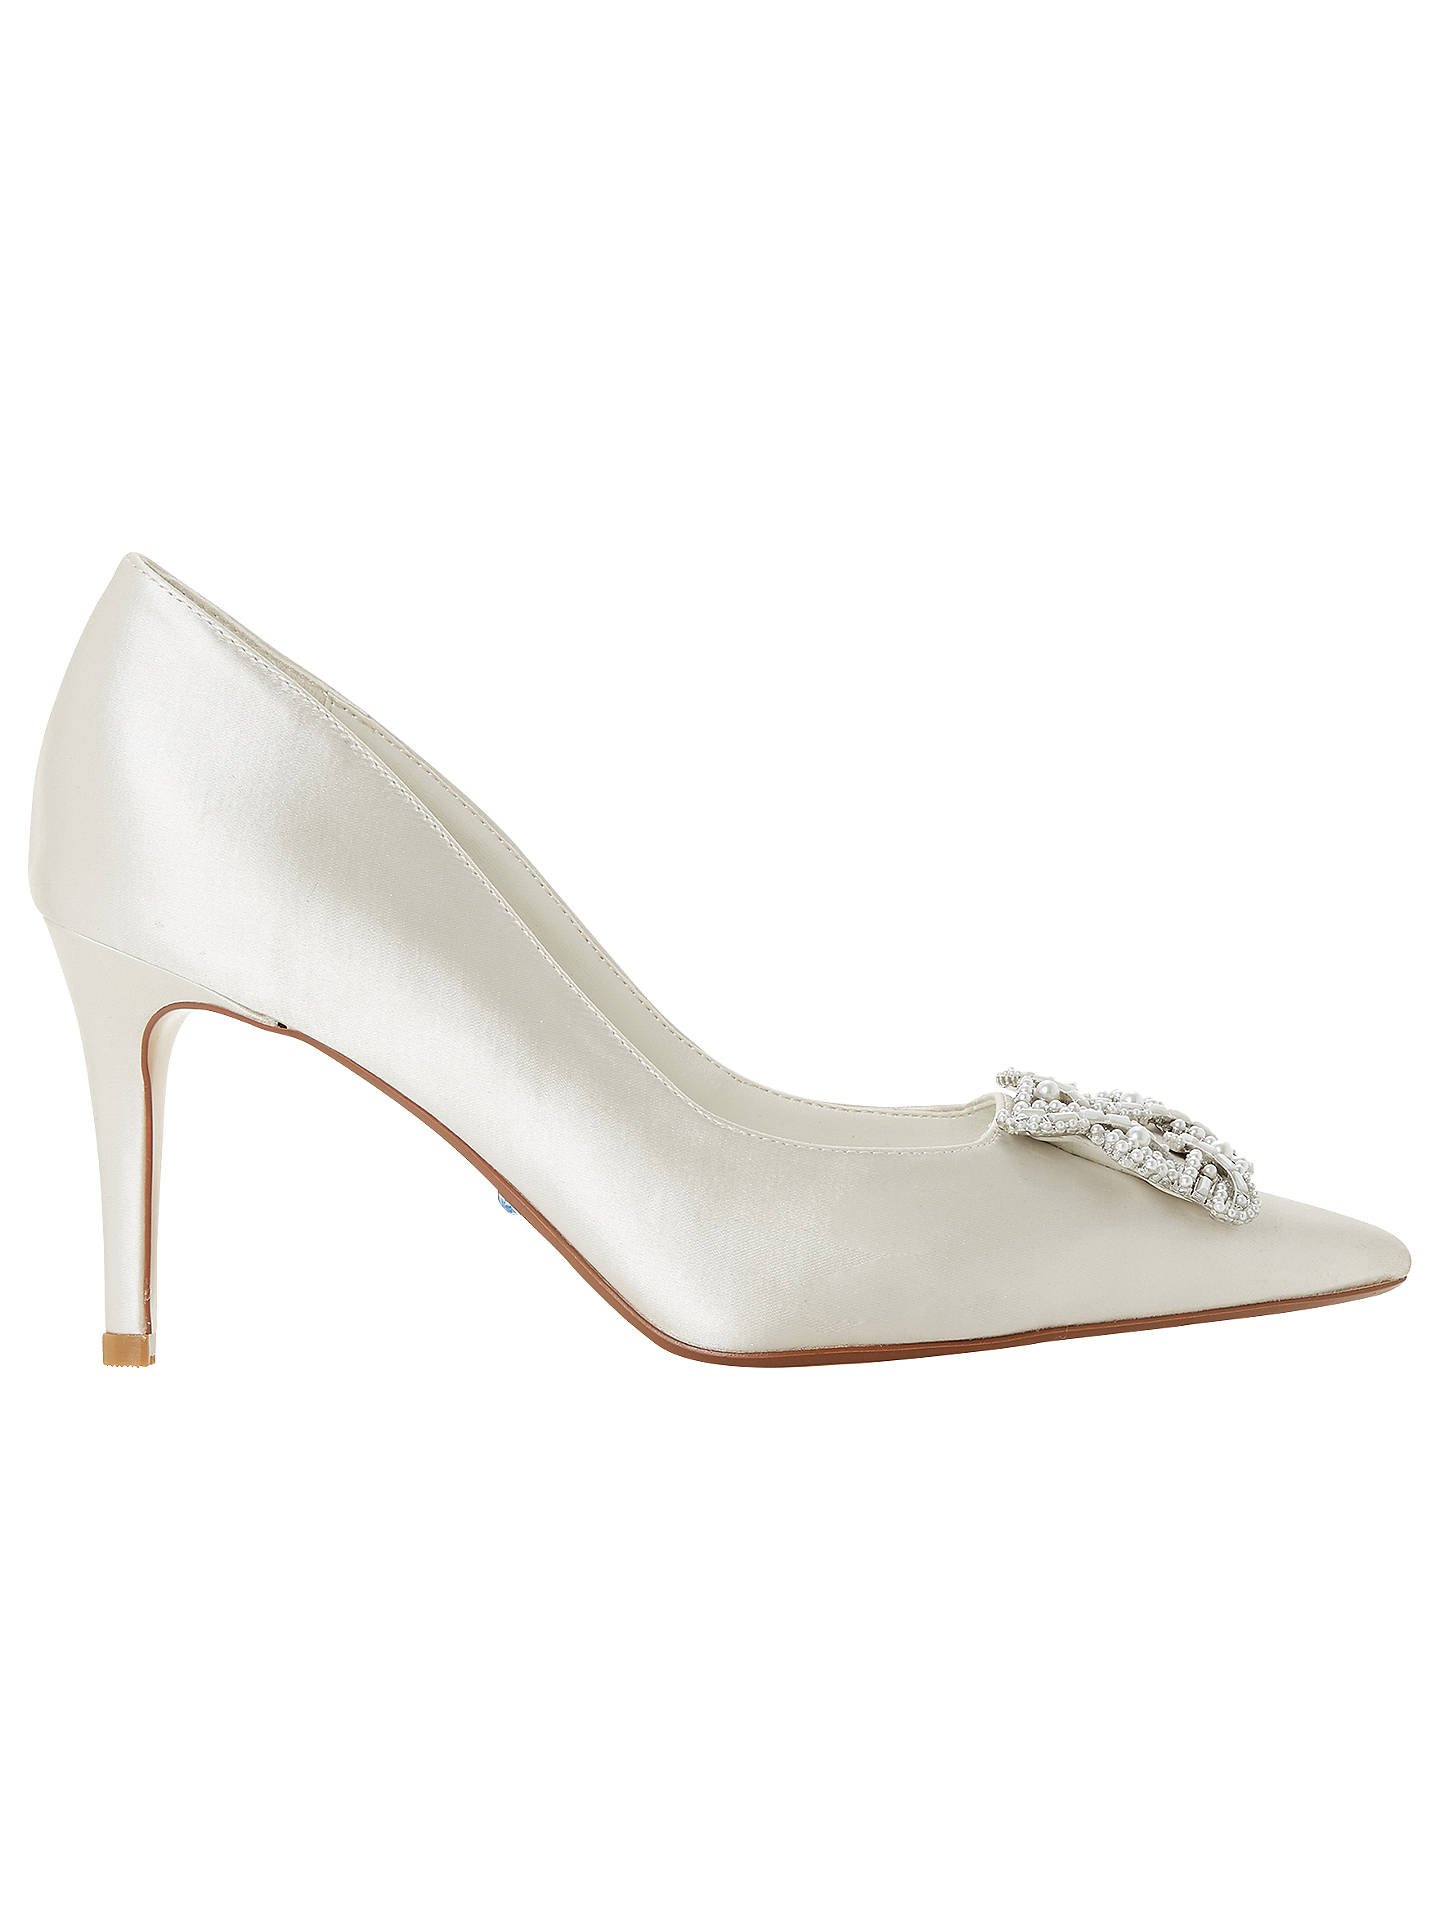 Dune Bridal Collection Breaann Jewel Stiletto Court Shoes, Ivory at ...